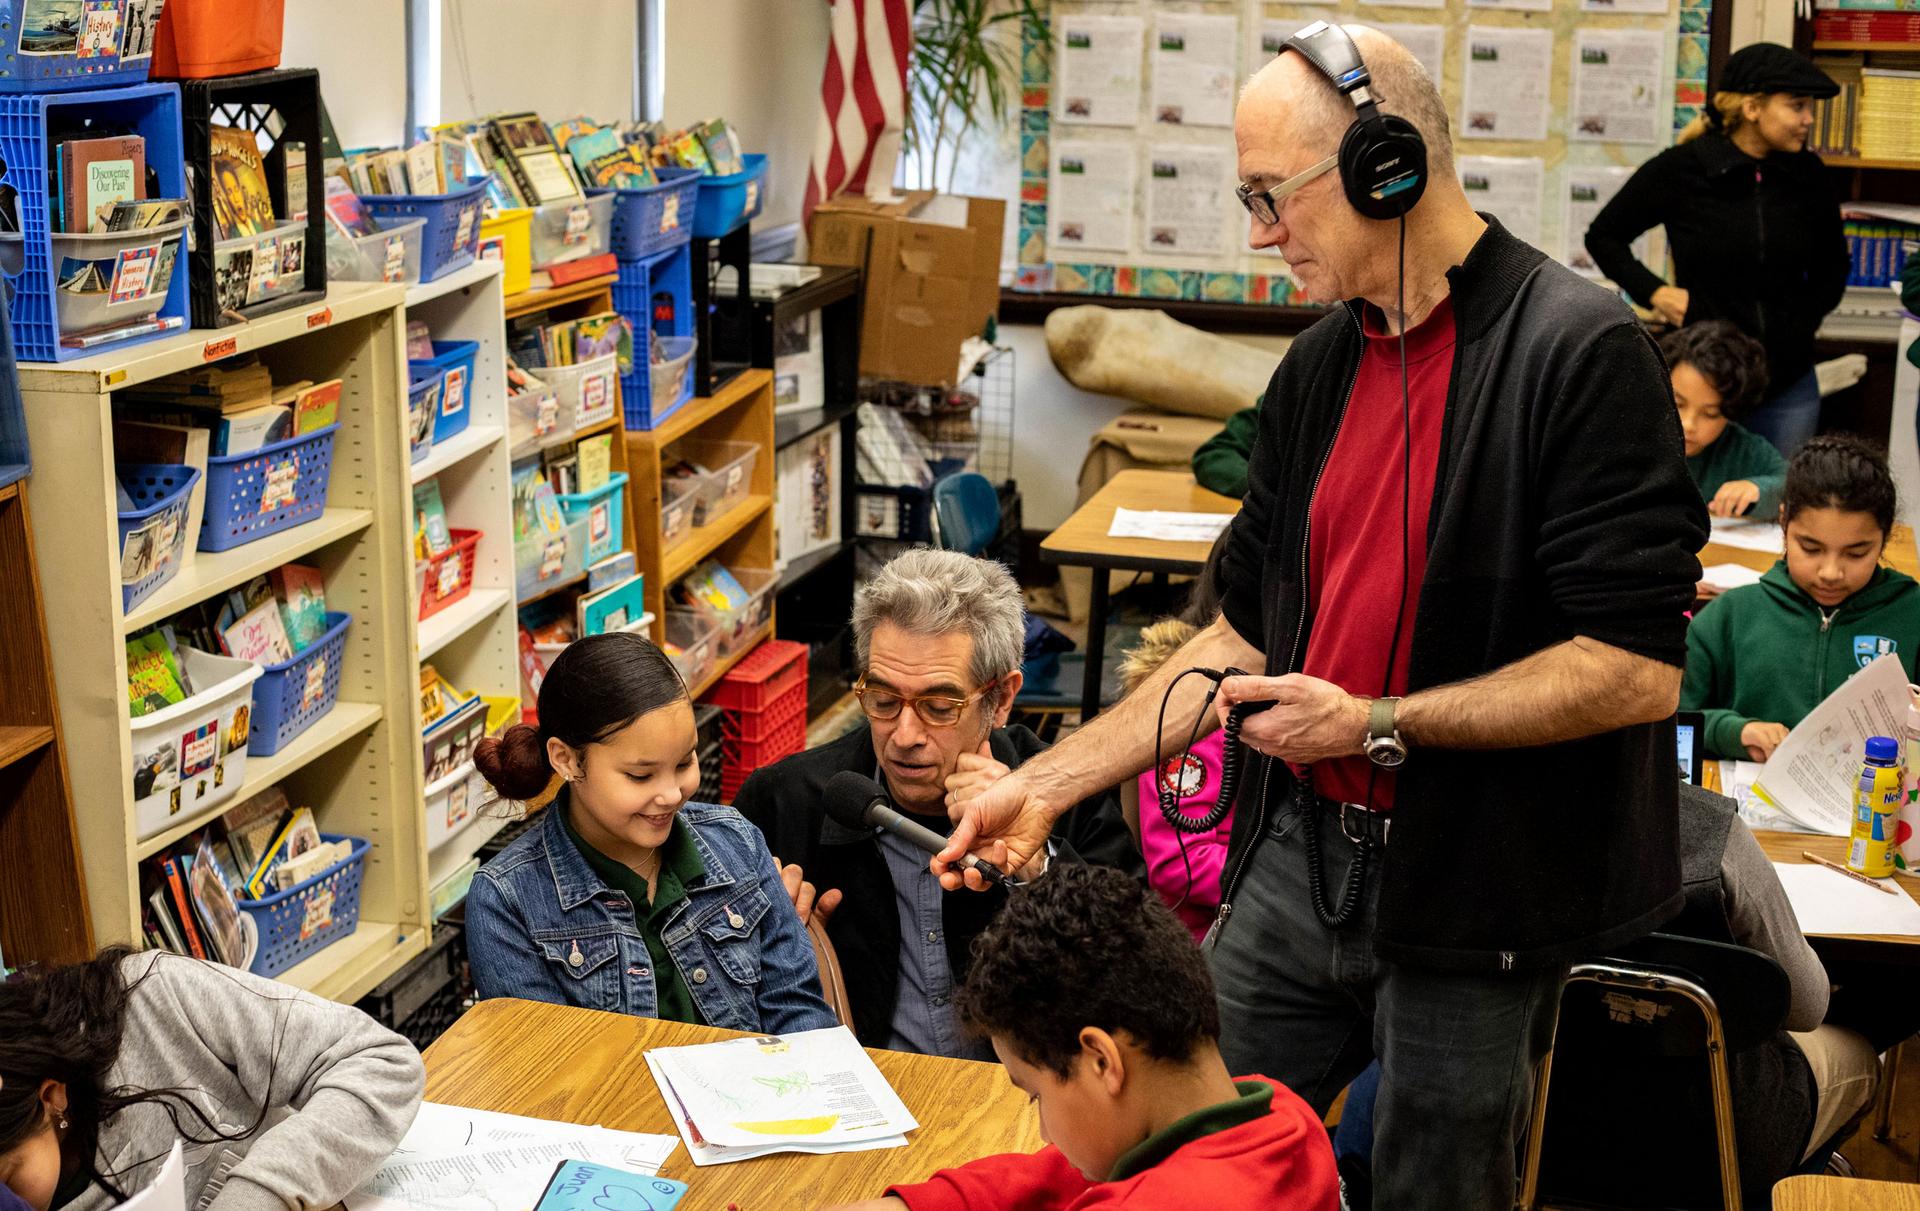 A young girl sits at a school table and reads while a man holds a microphone next to her and records her reading.